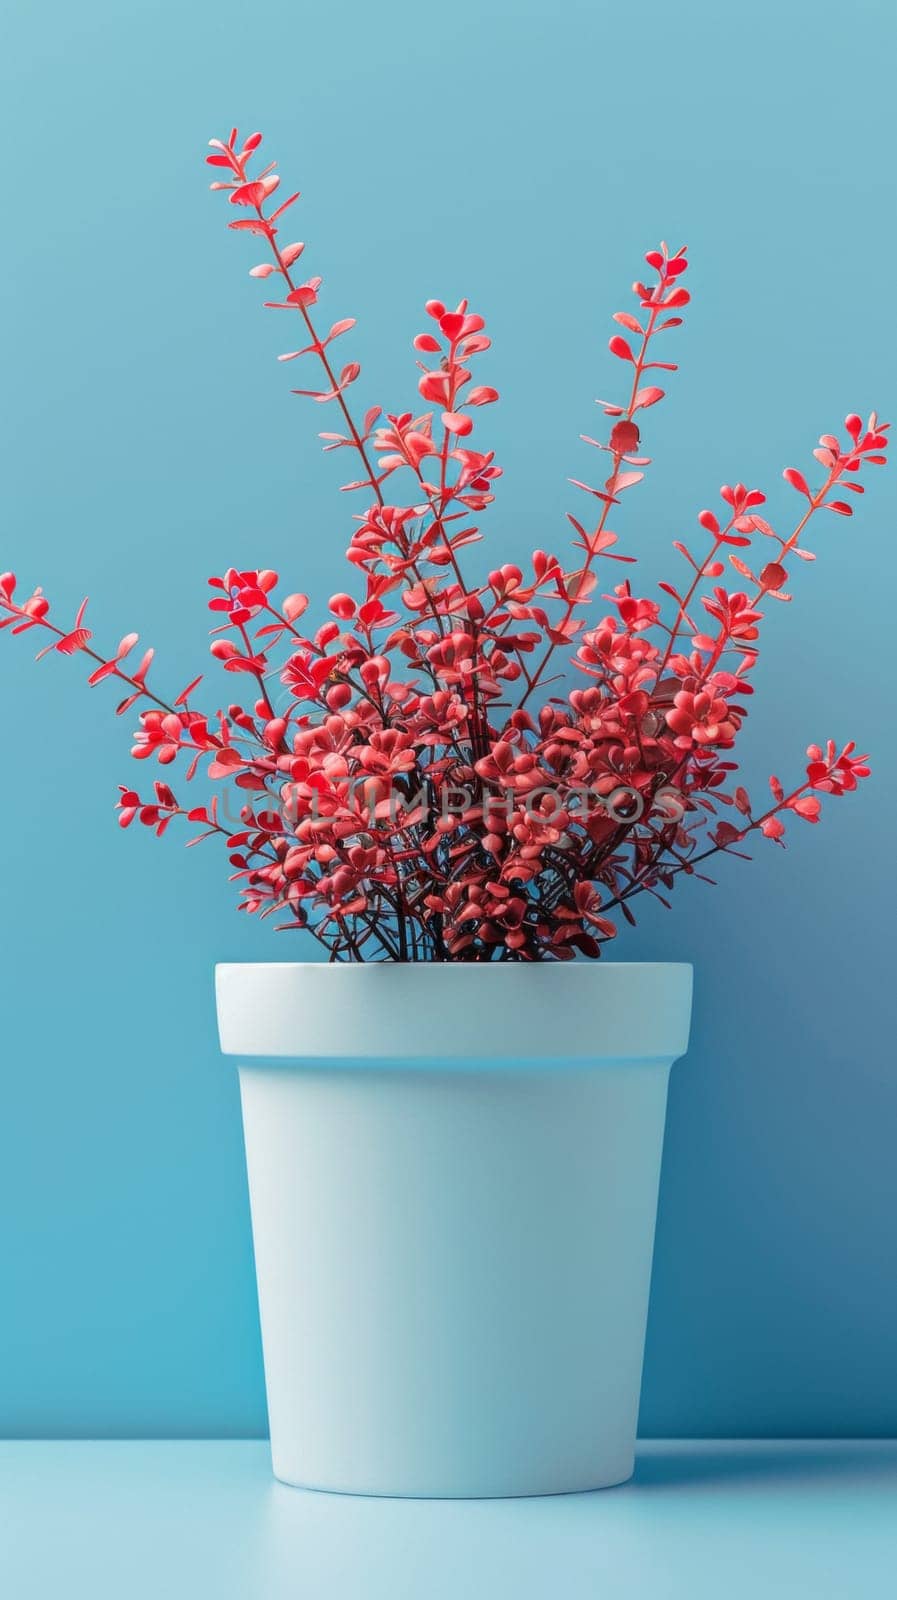 A white pot with red flowers in it on a blue wall